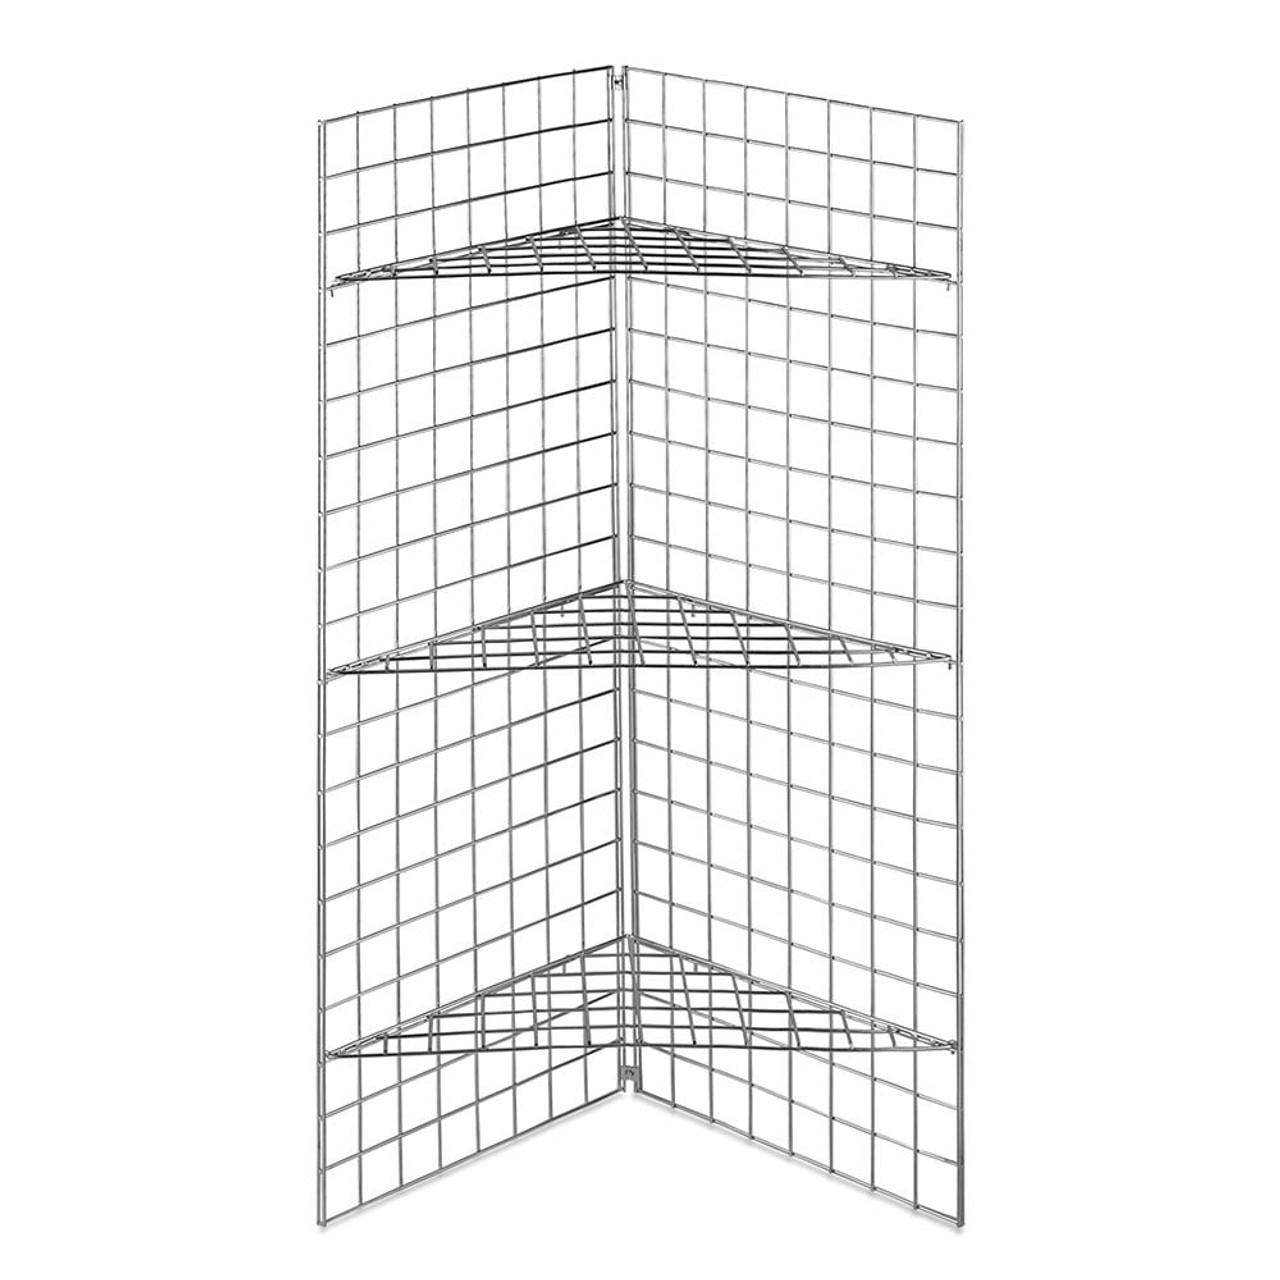 5ft Freestanding Grid Mesh Display Bundle With 2 x Panels, 3 x Wire Shelves  - Each side: H1520 x W610mm